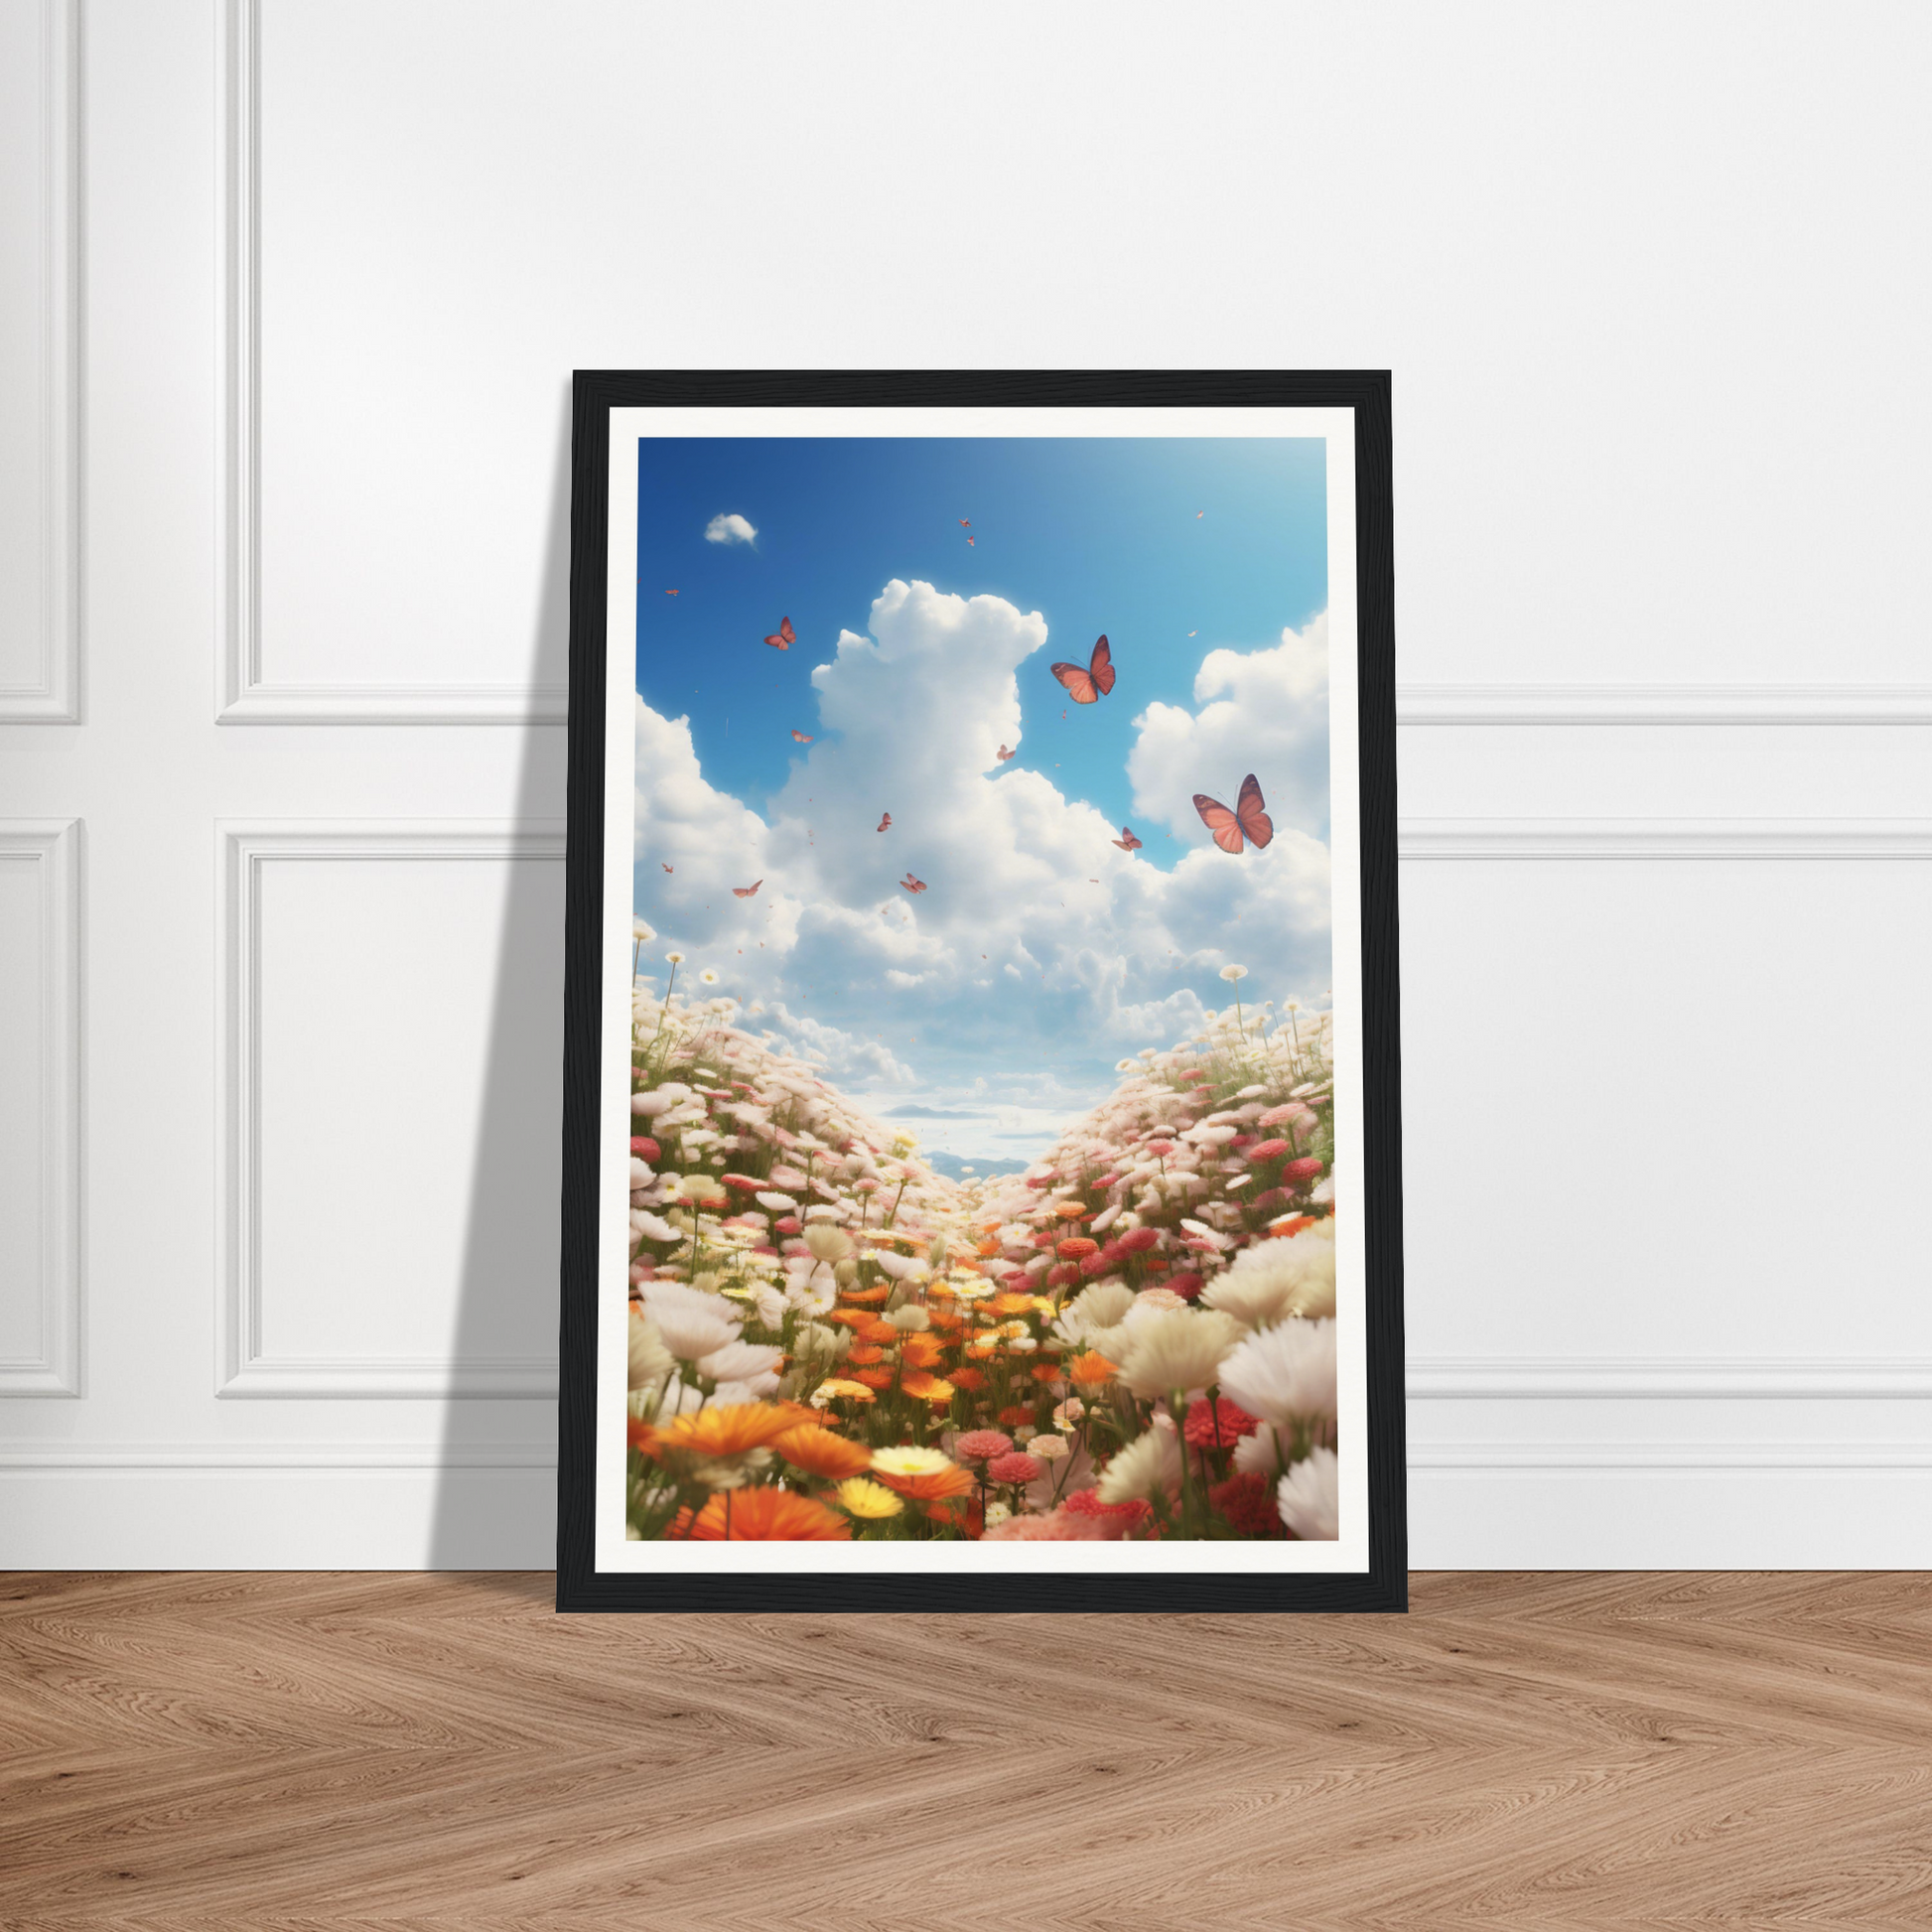 A high quality framed print of Happiness Is Flowers - Museum-Quality Matte Paper Wooden Framed Poster from The Oracle Windows™ Collection with butterflies in the sky, perfect for fashion wall art enthusiasts.